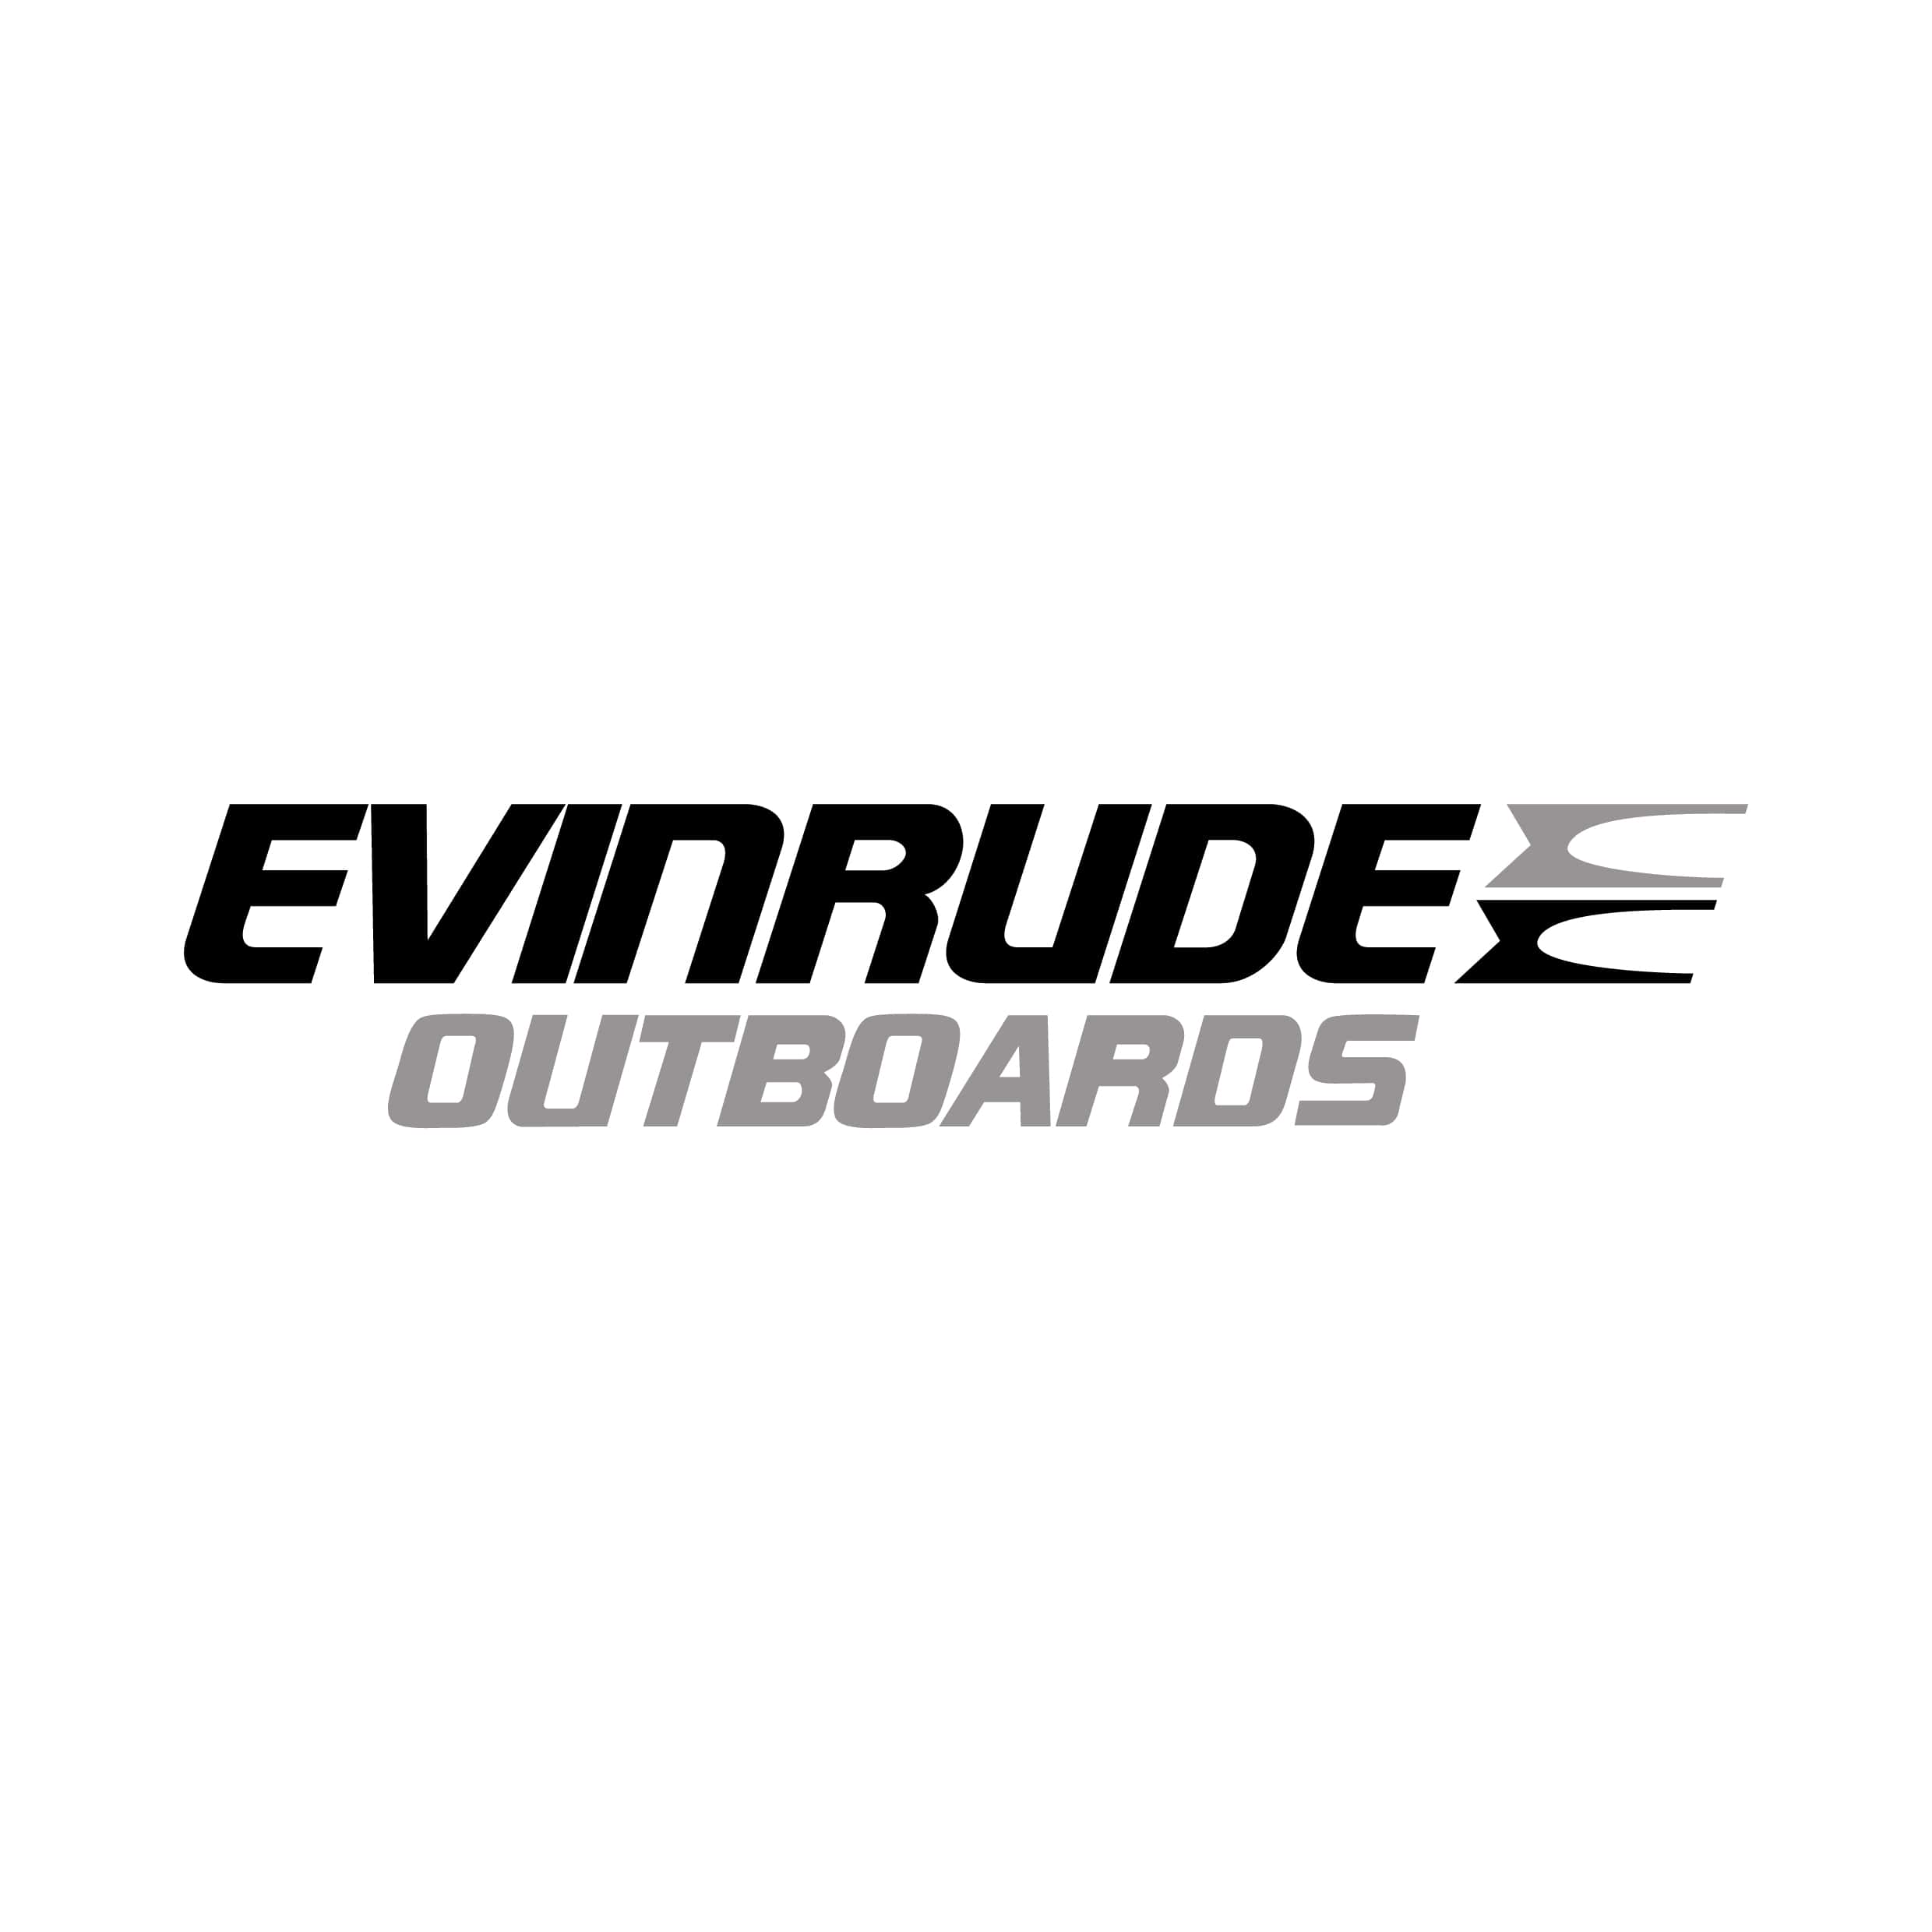 STICKERS EVINRUDE OUTBOARDS LOGO